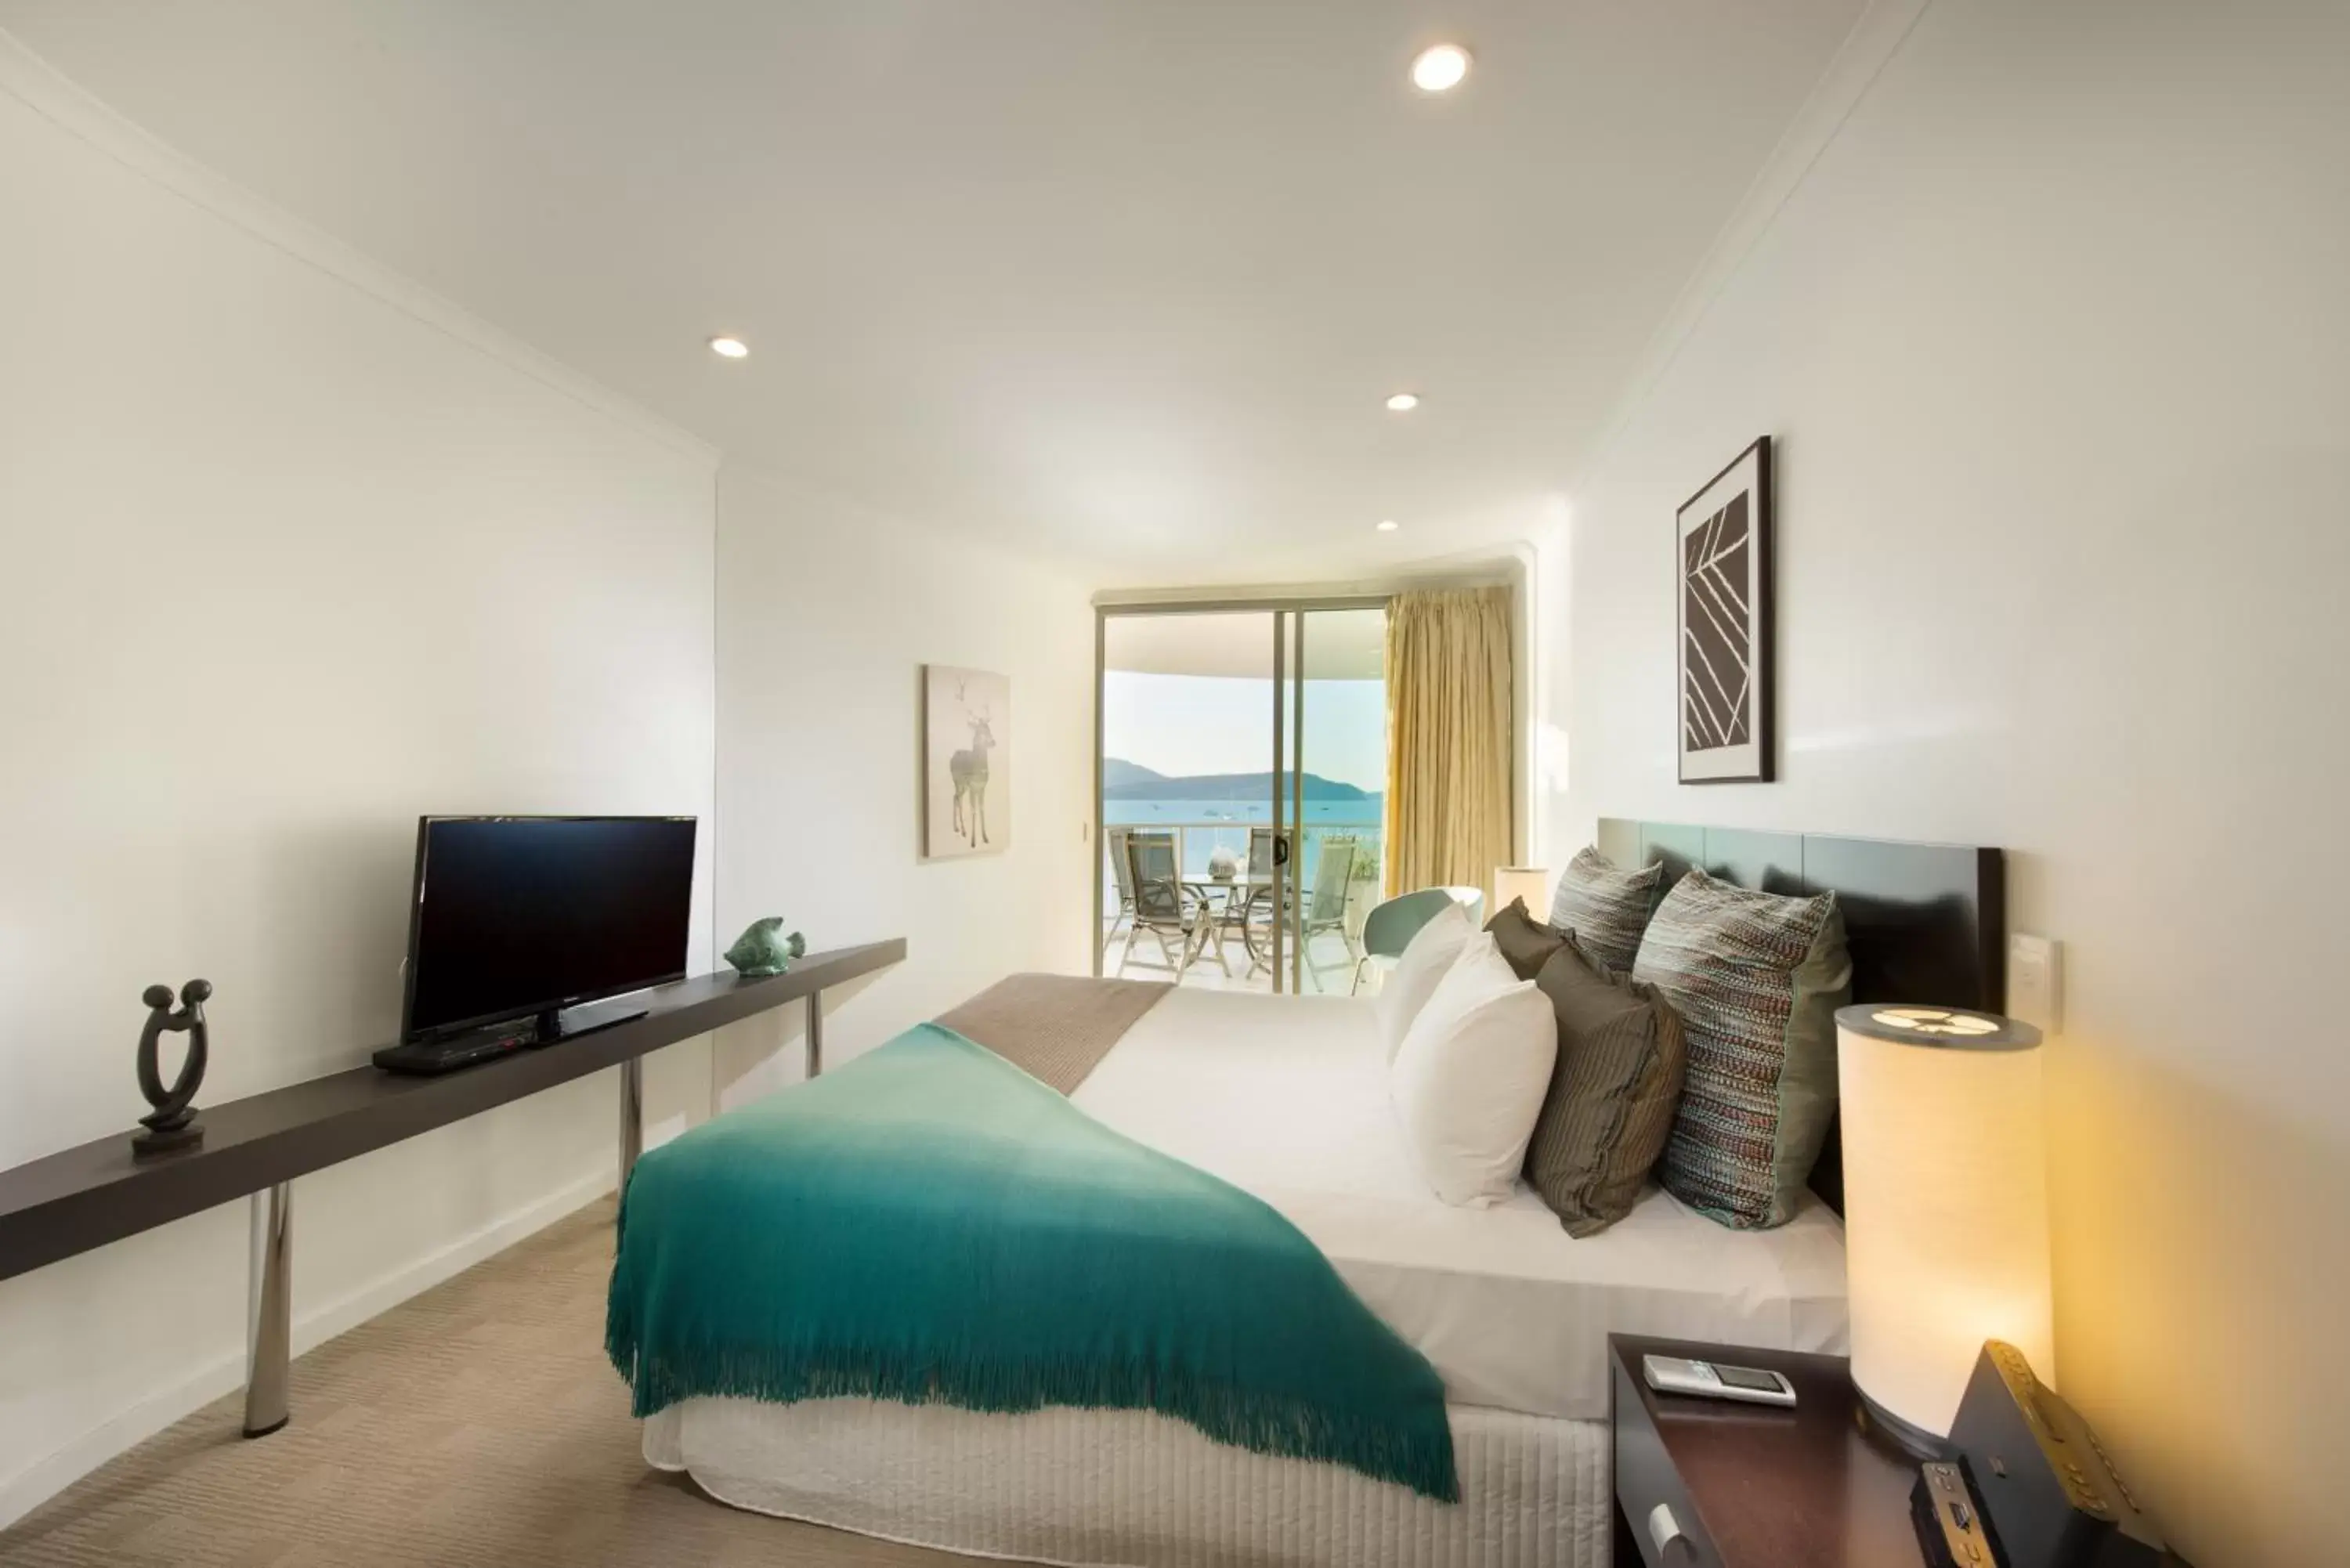 Bedroom, TV/Entertainment Center in at Marina Shores